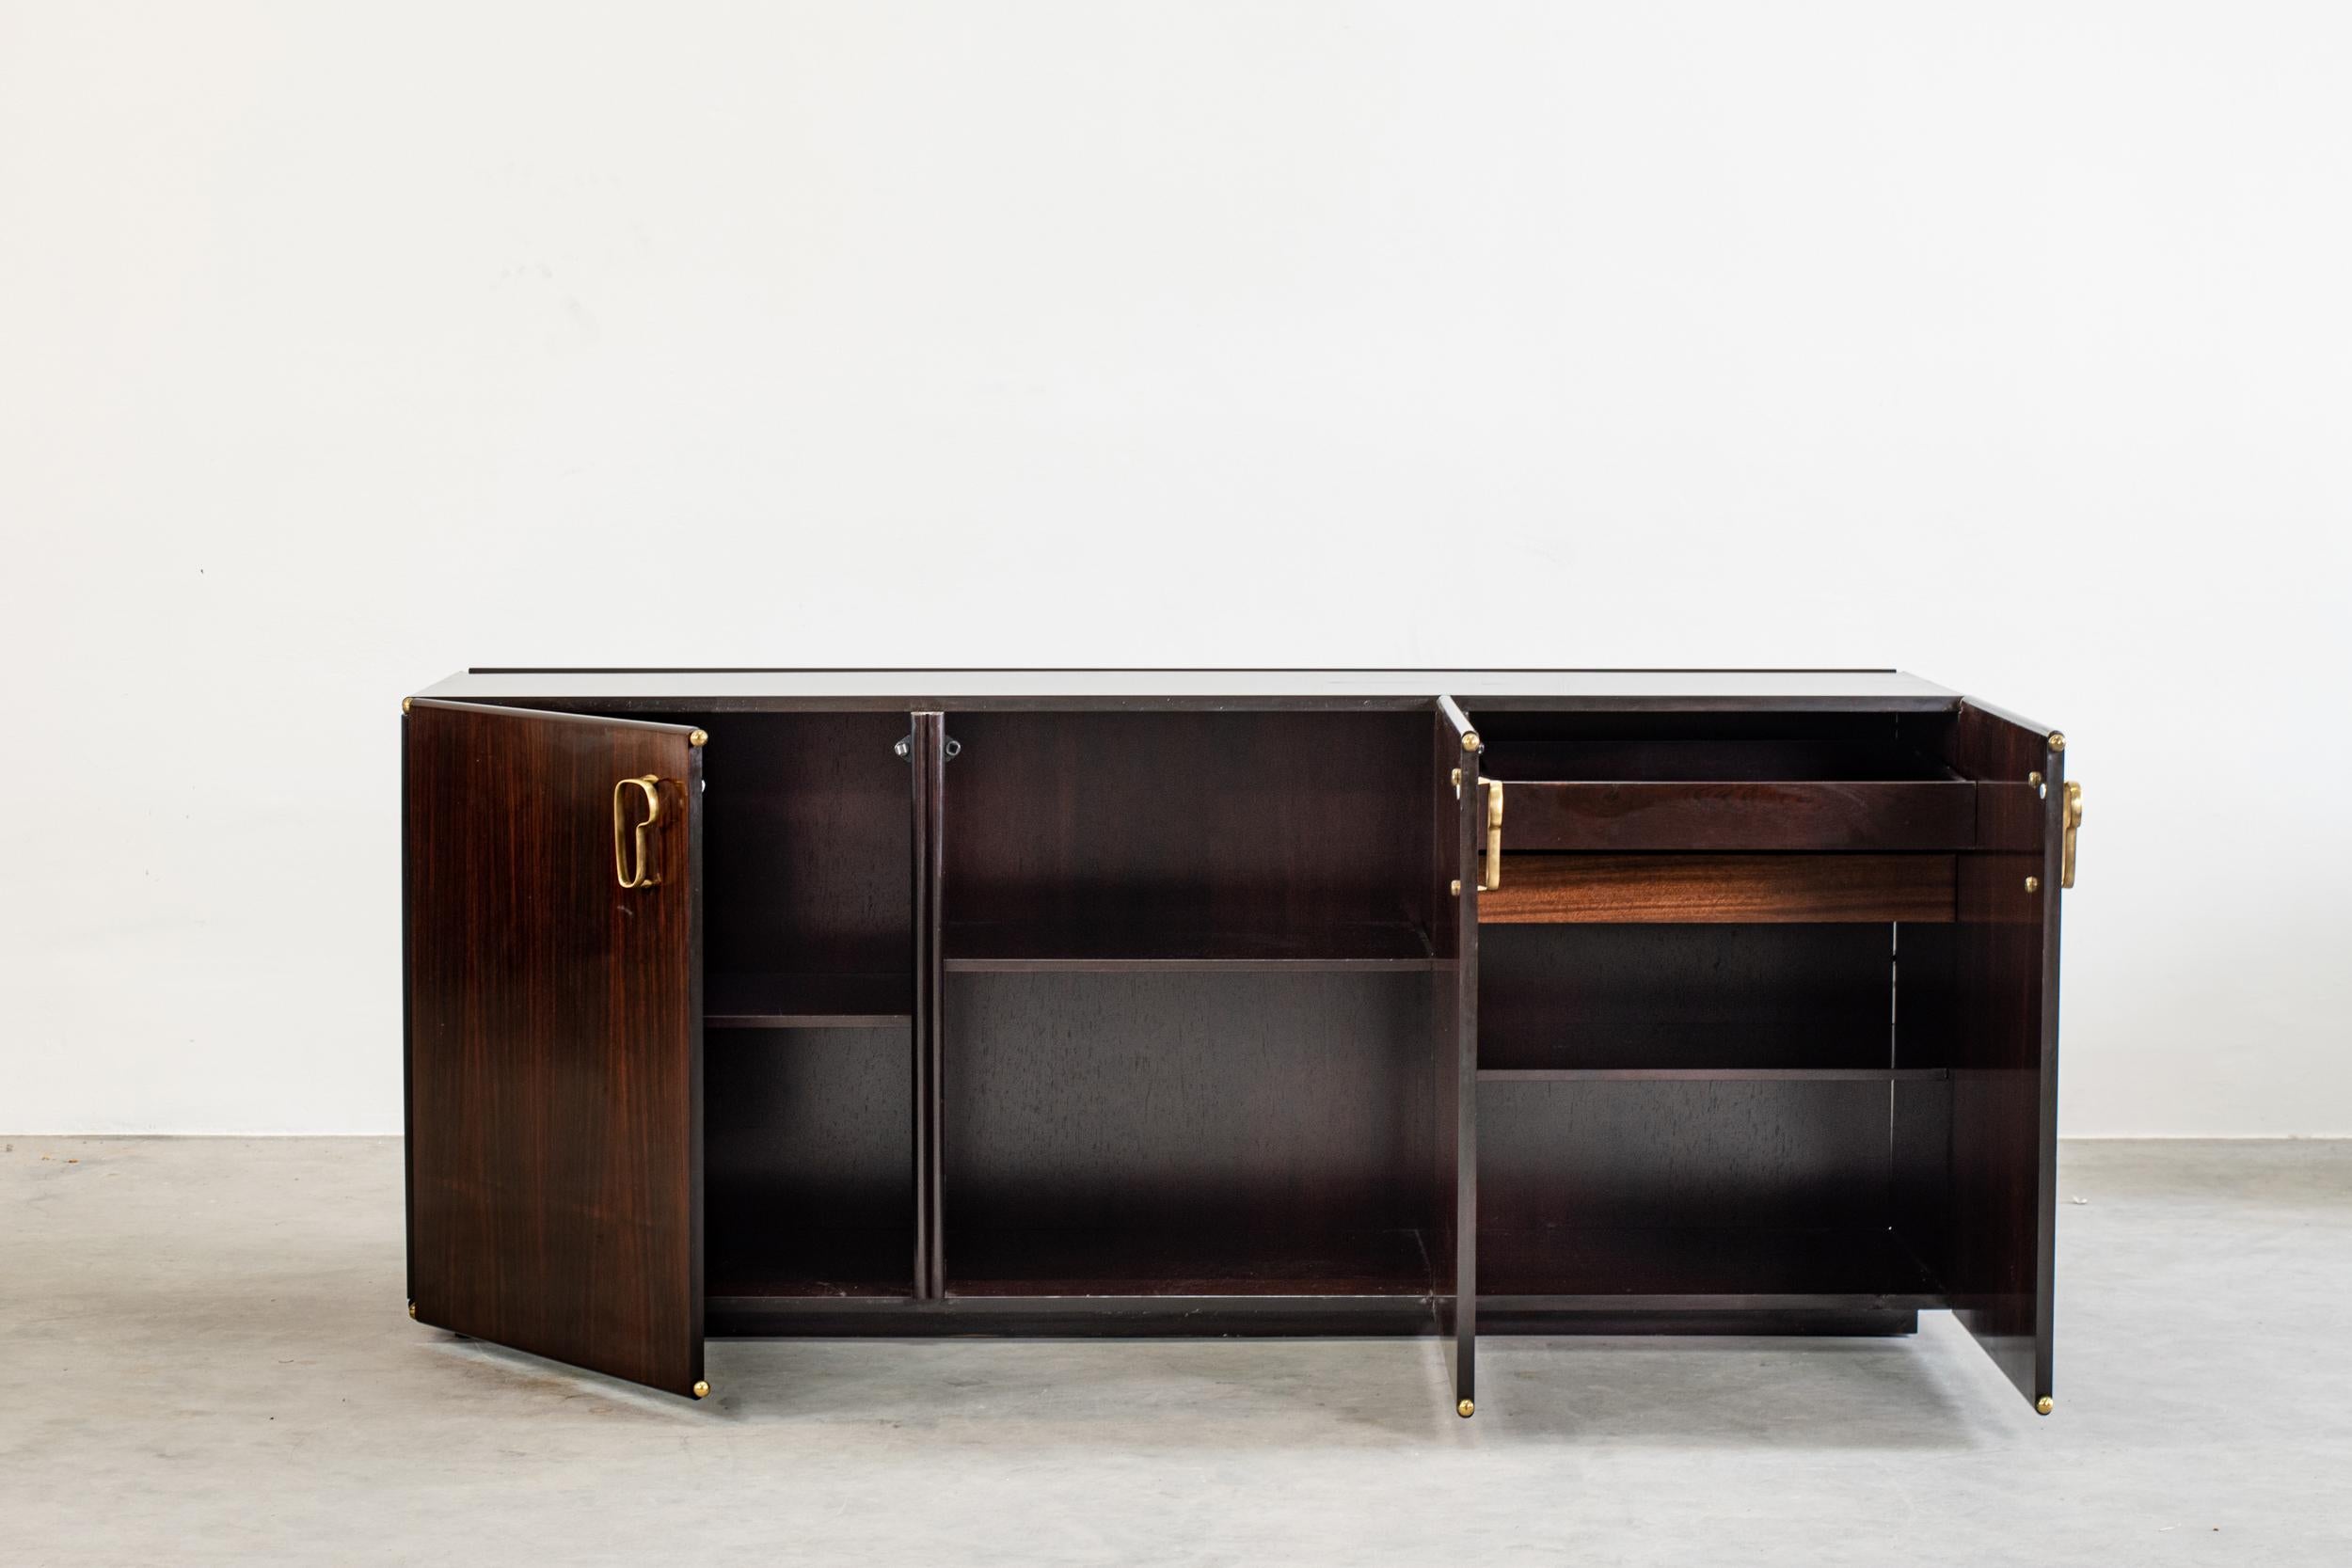 Midcentury Rosewood Sideboard, Italian Manufacture, 1950s In Good Condition For Sale In Montecatini Terme, Toscana